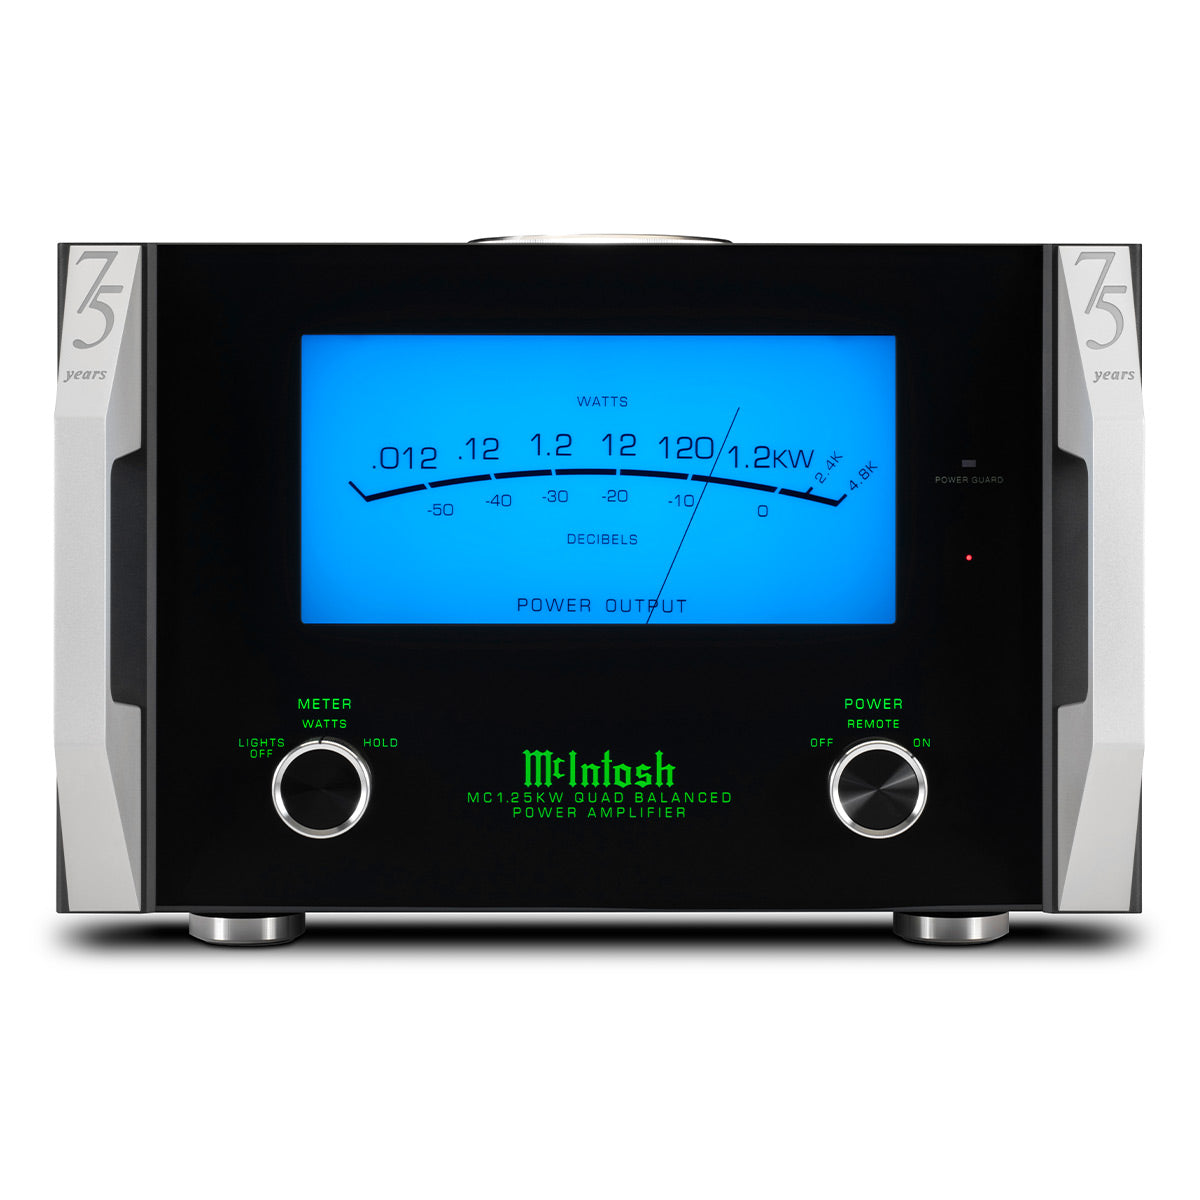 McIntosh MC1.25KW 1-Channel Solid State Amplifier (75th Anniversary Edition)